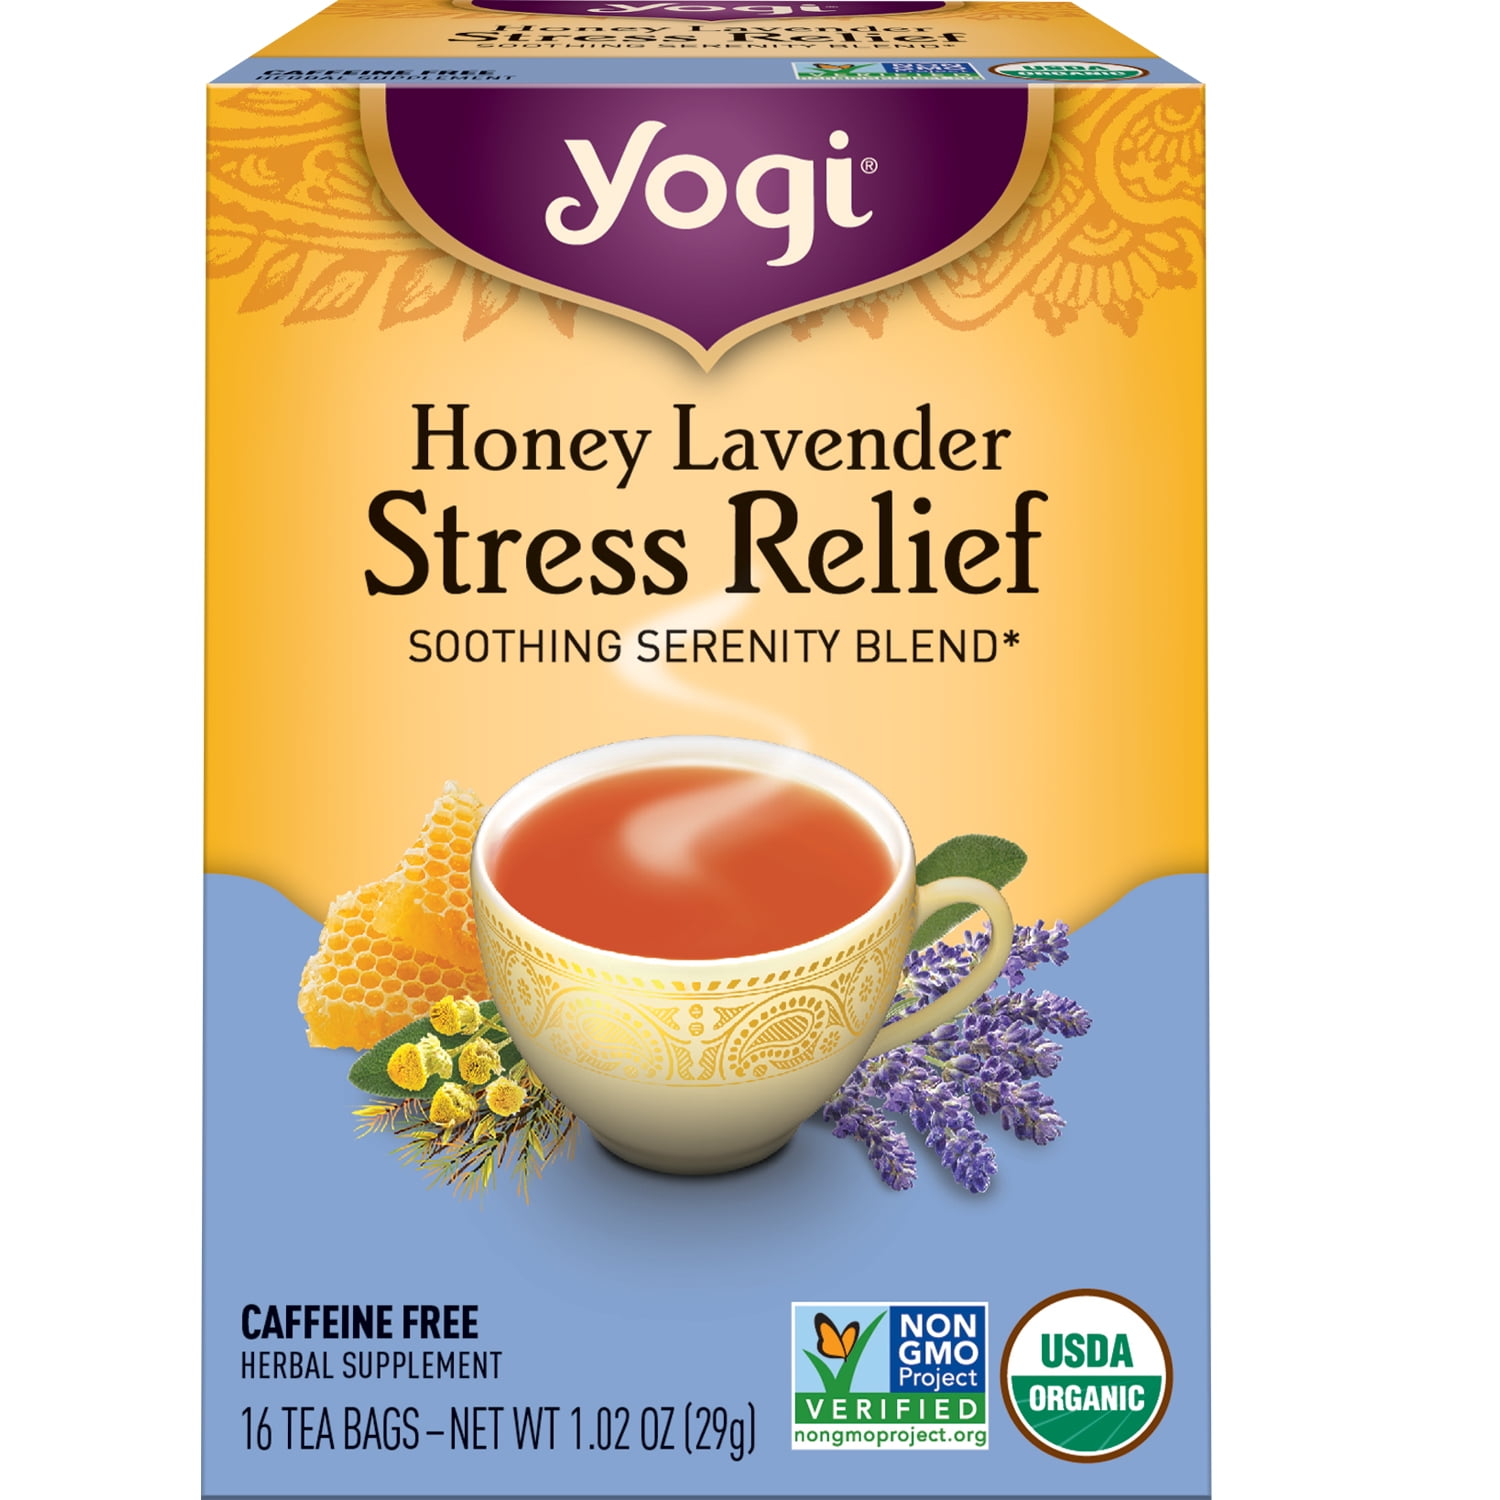 Yogi Tea - Honey Lavender Stress Relief (6 Pack) - Soothing Serenity Blend  with Lavender, Chamomile, and Peppermint - Caffeine Free - 96 Organic  Herbal Tea Bags 